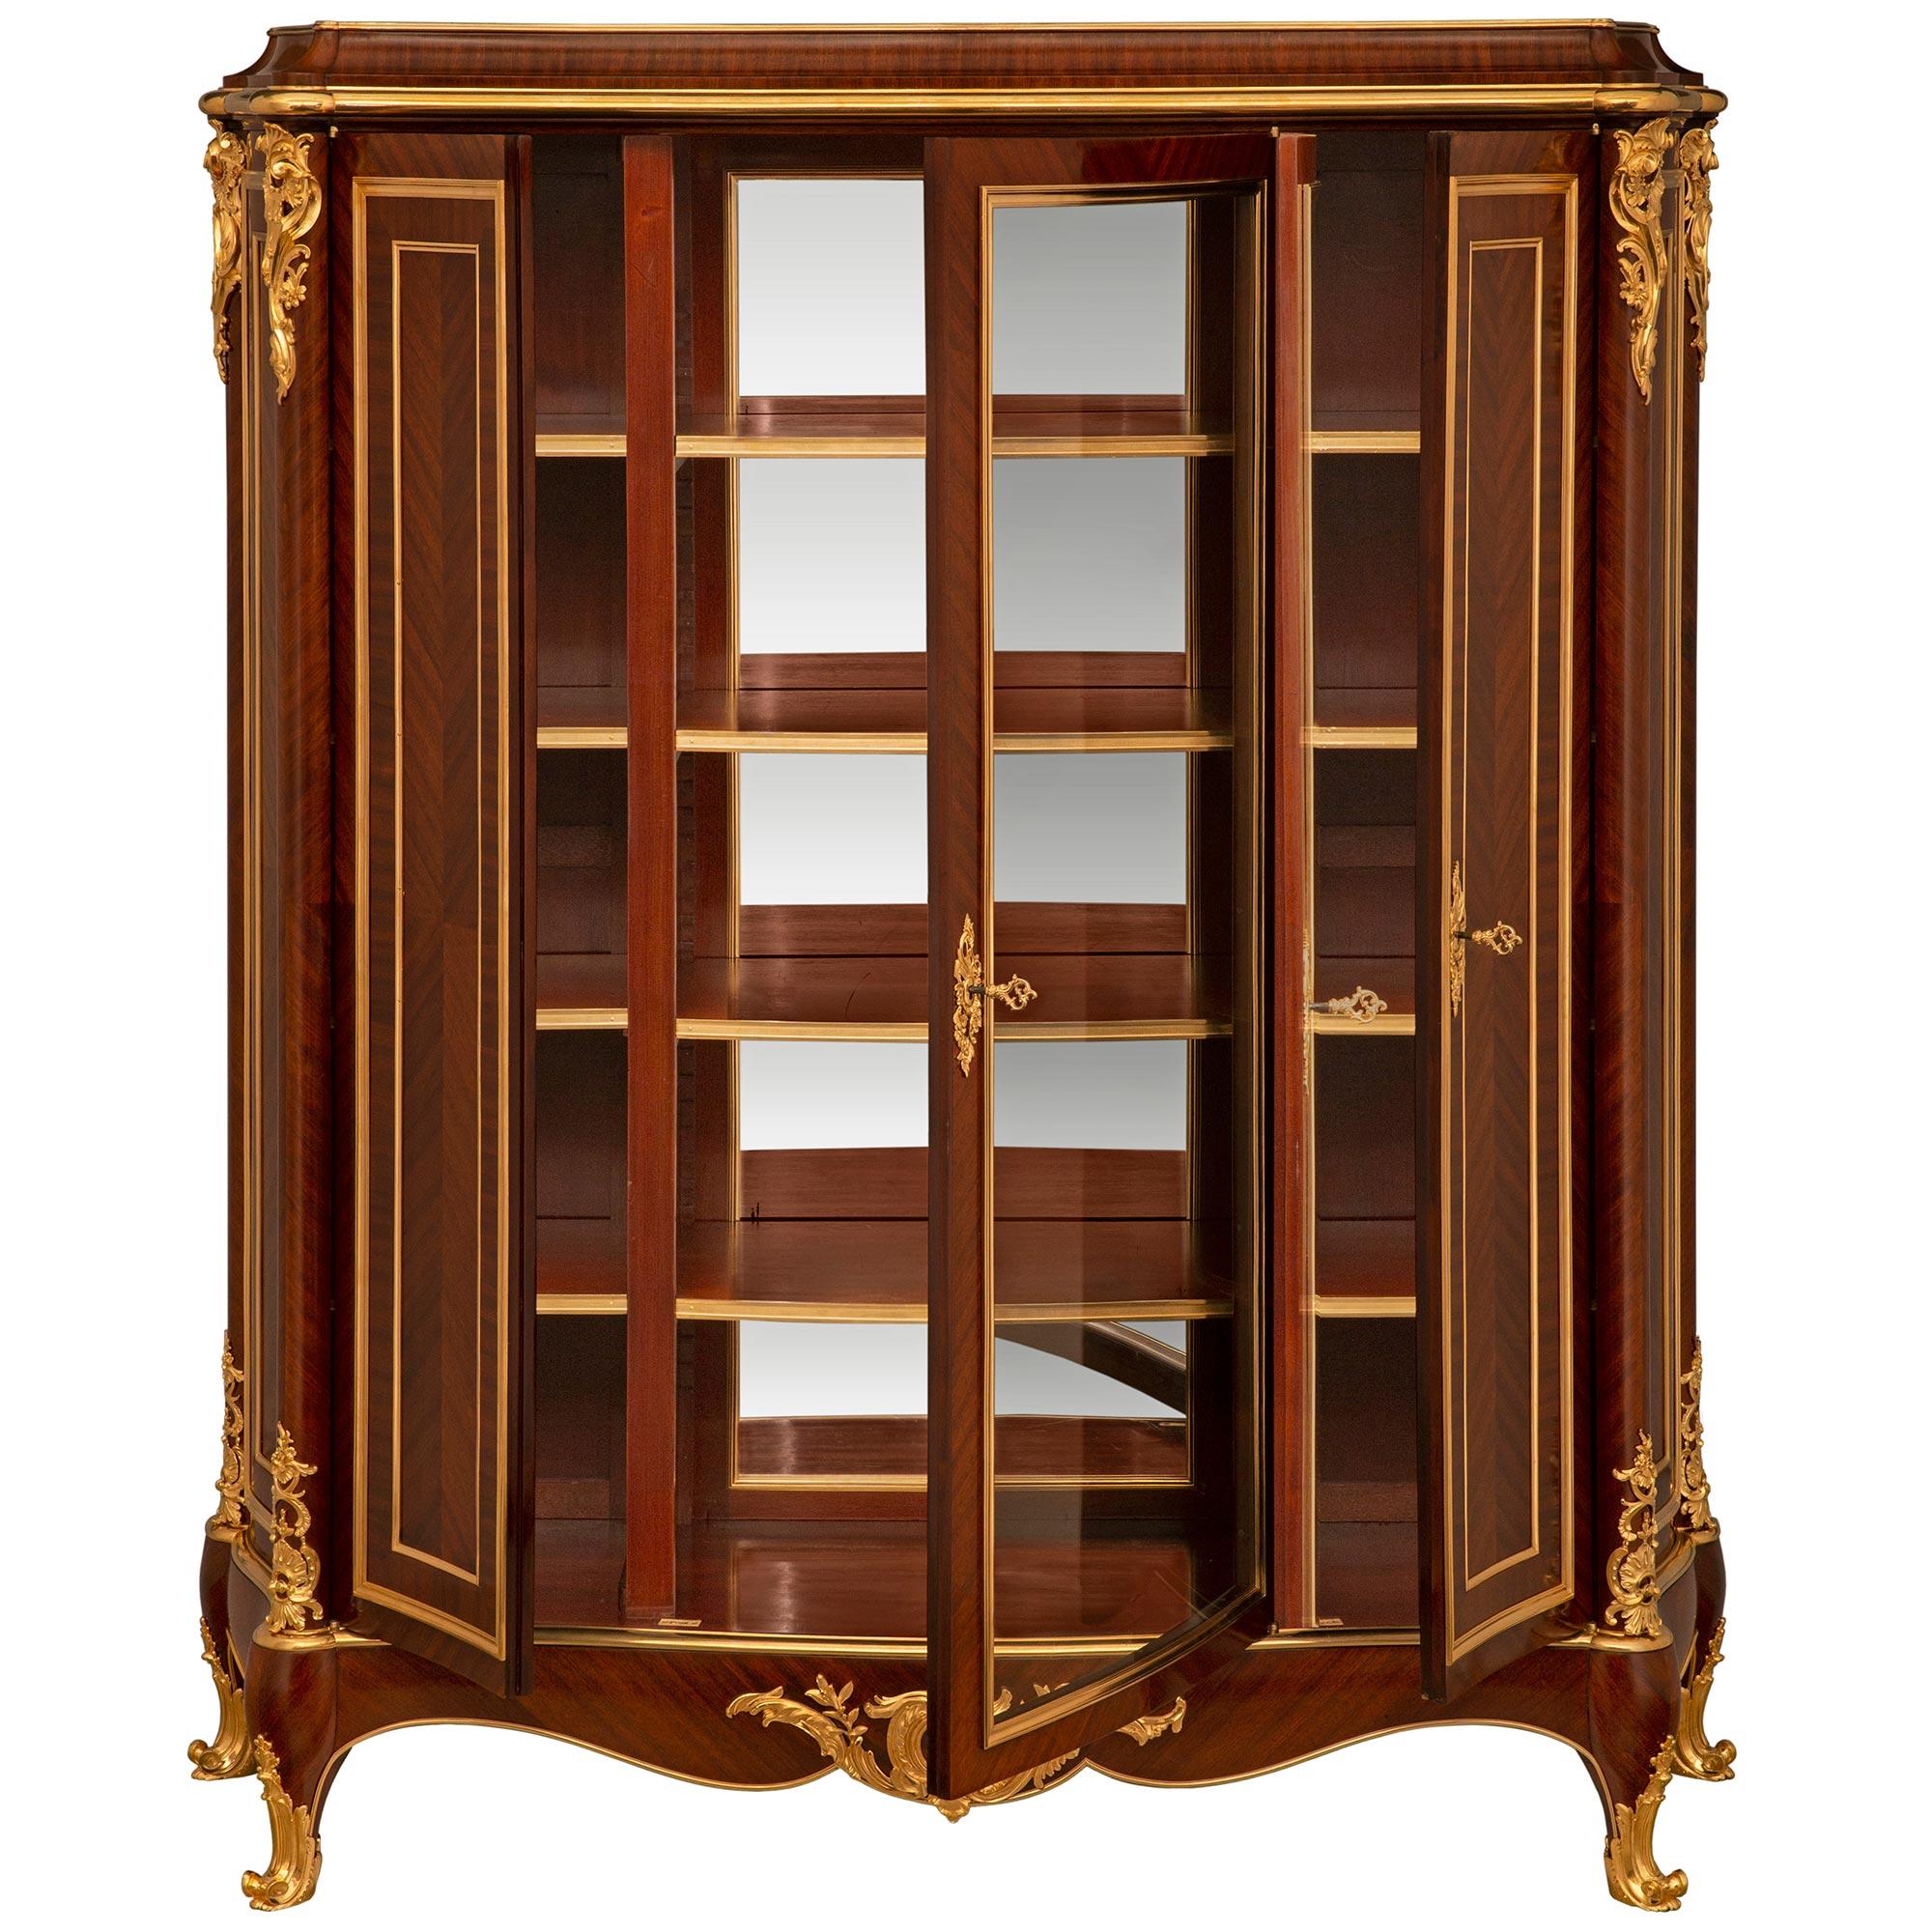 A stunning and high quality French 19th century Louis XVI st. Ormolu and Tulipwood cabinet/vitrine, signed Henry Dasson 1886. This beautiful tall rectangular three door vitrine is supported by four Tulipwood cabriole legs and wrap around Ormolu